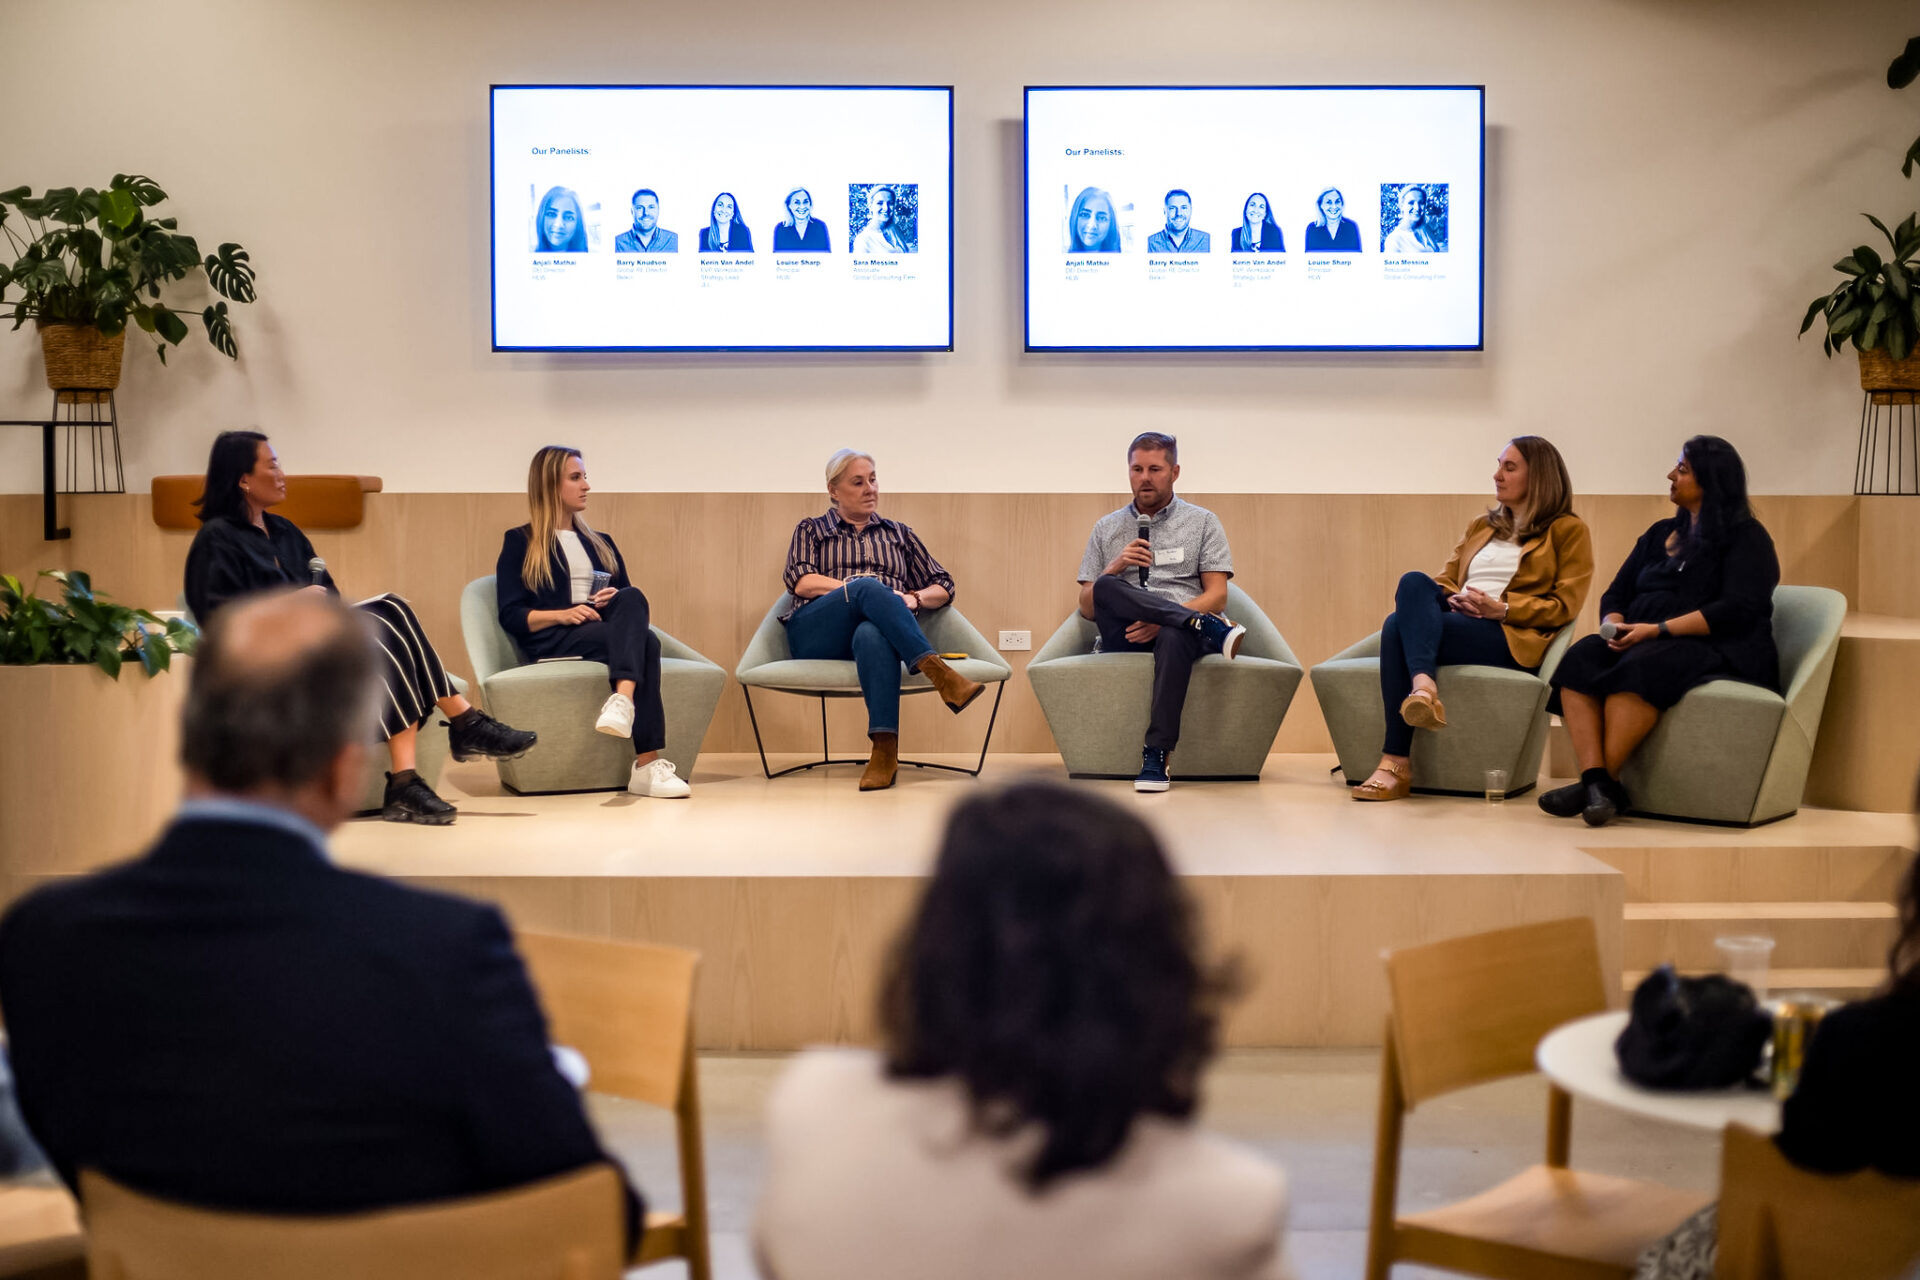 Six individuals lead a panel discussion at the Belkin El Segundo workplace. The interior space is brightly lit with warm wood accents and biophilic elements like robust plantings.